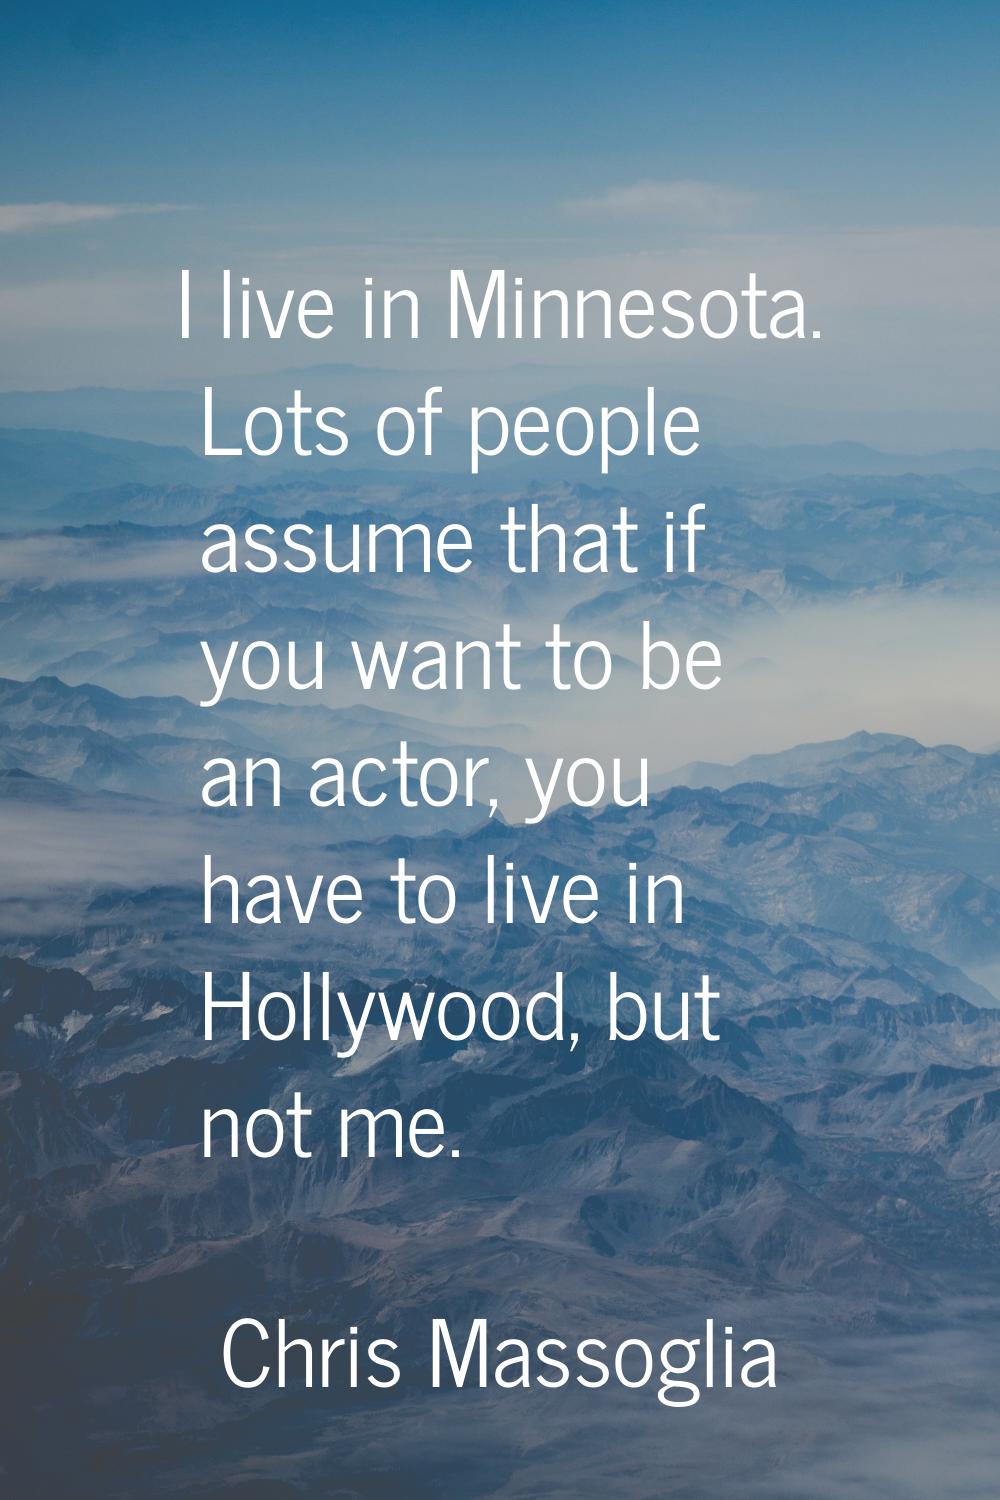 I live in Minnesota. Lots of people assume that if you want to be an actor, you have to live in Hol